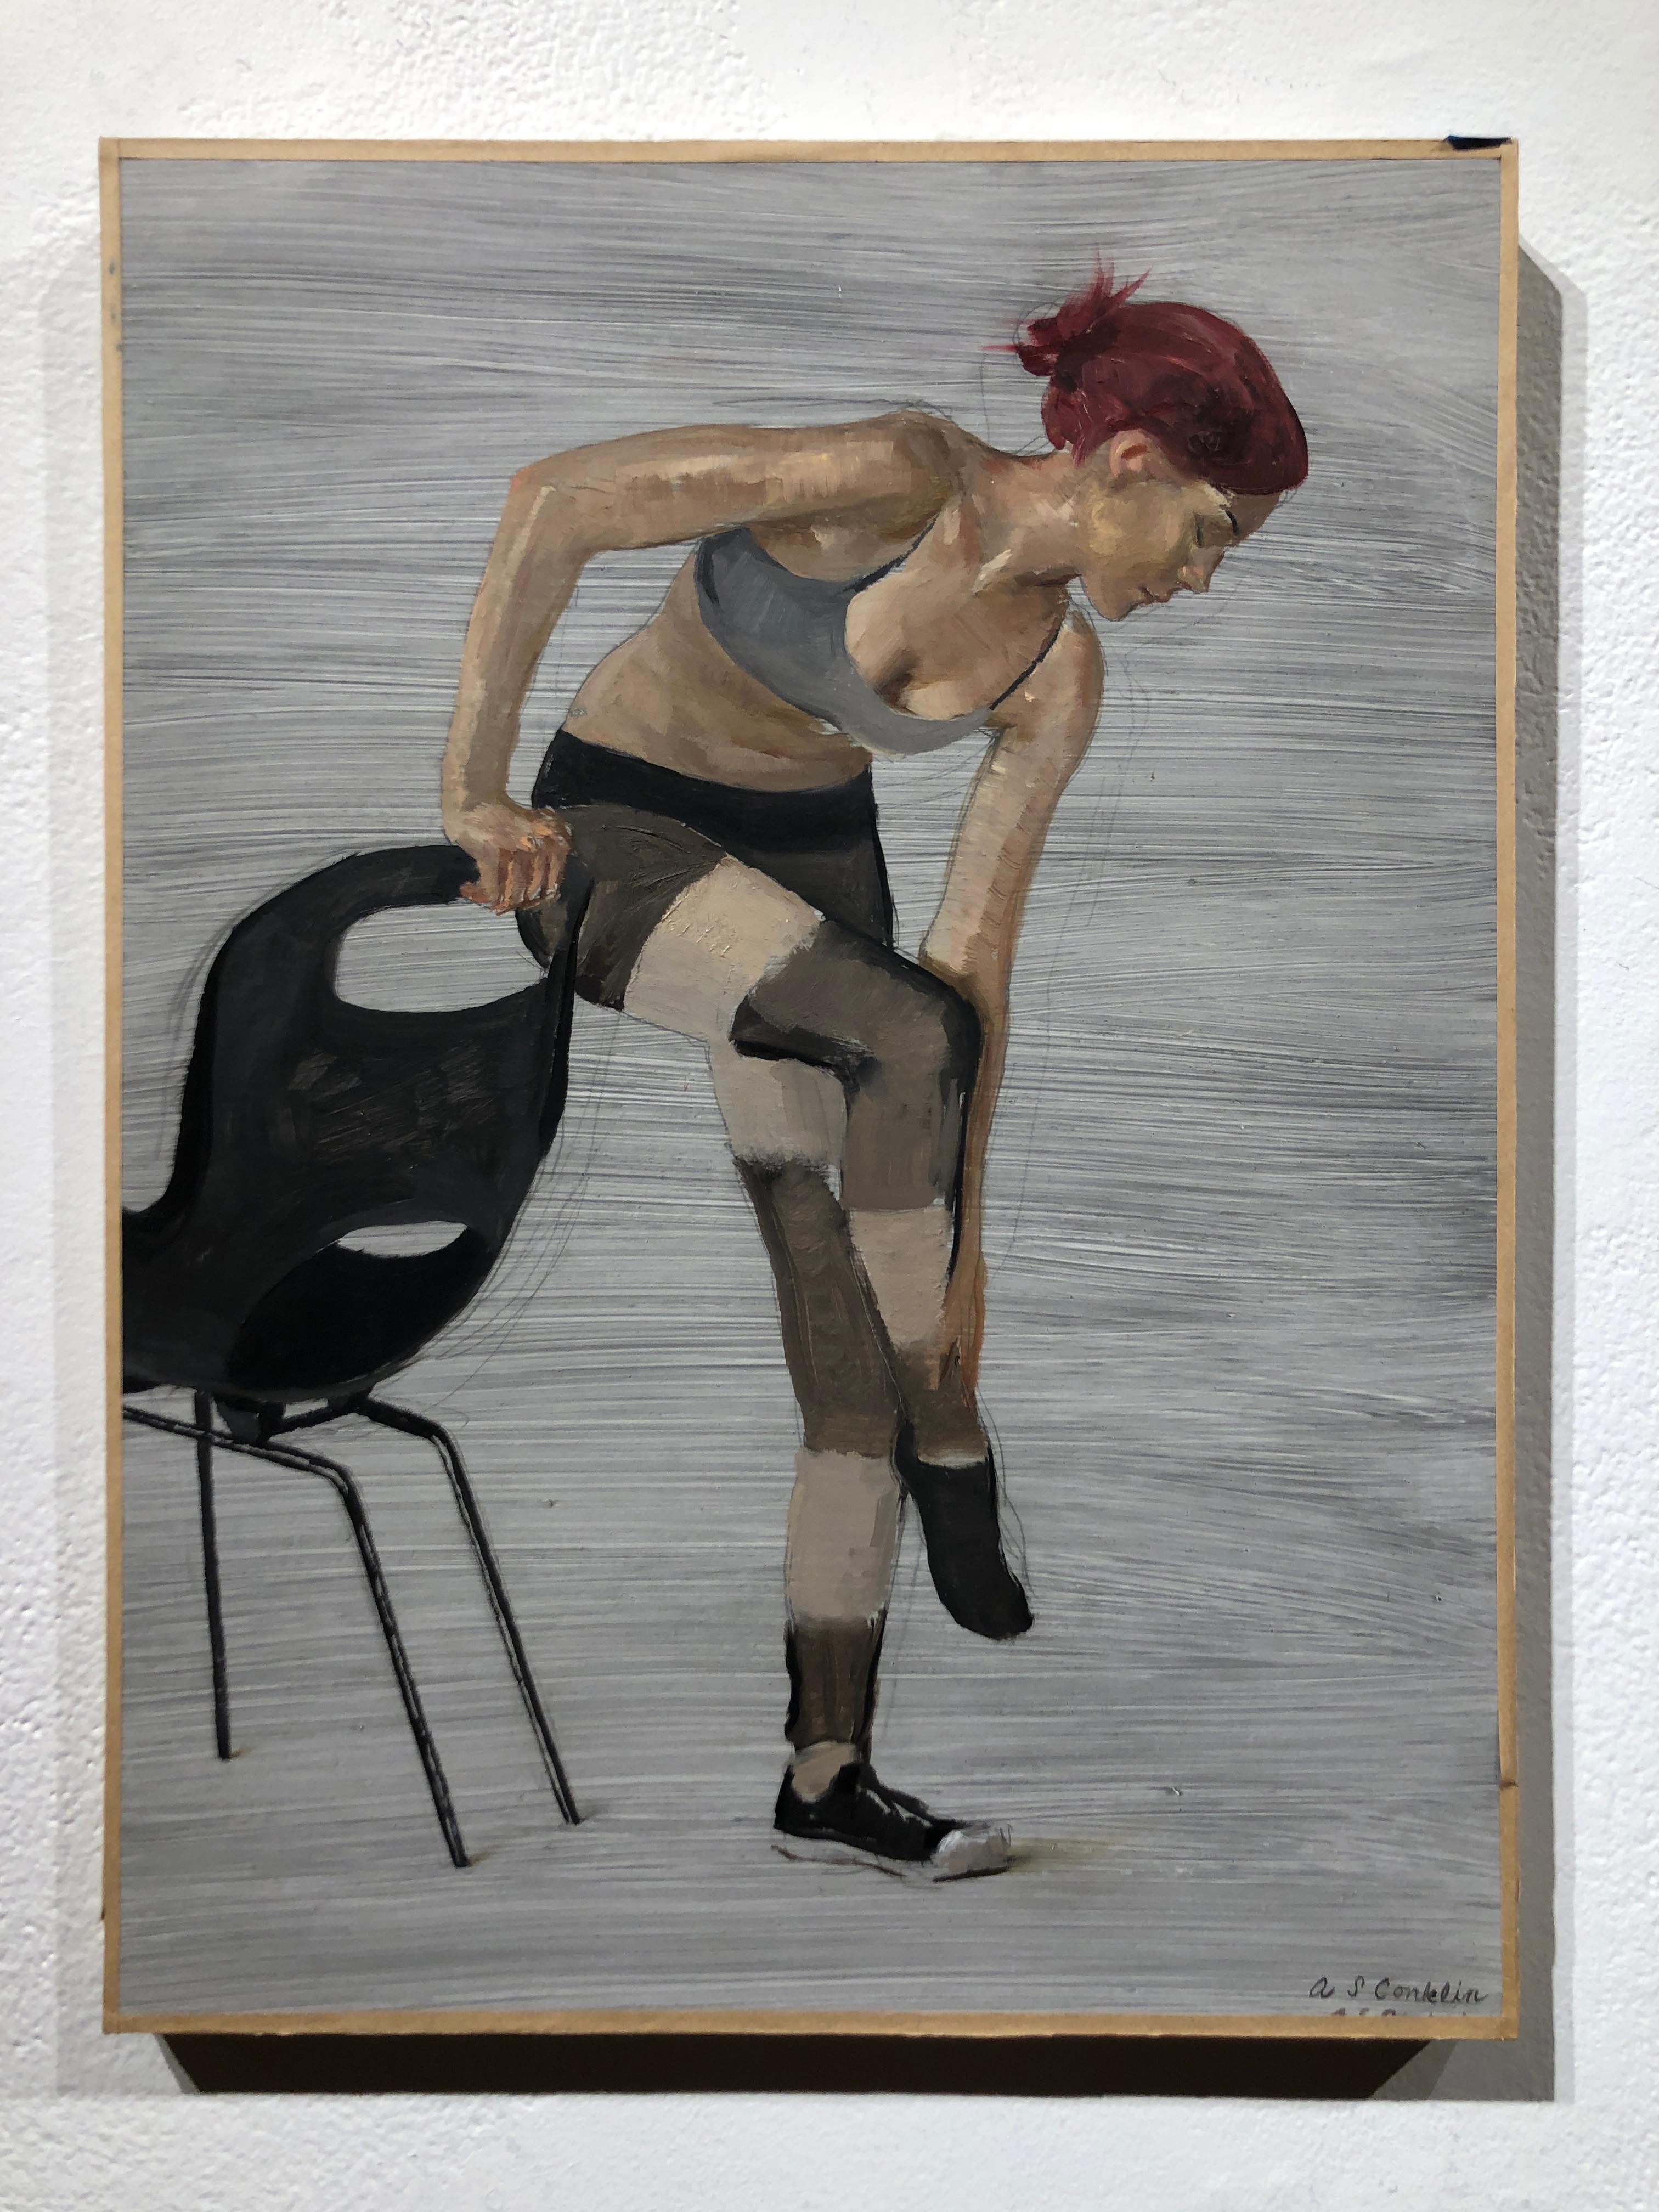 Courtney Standing on One Foot, (study for Motion Capture 6) - Original Oil Paint - Painting by Andrew S. Conklin